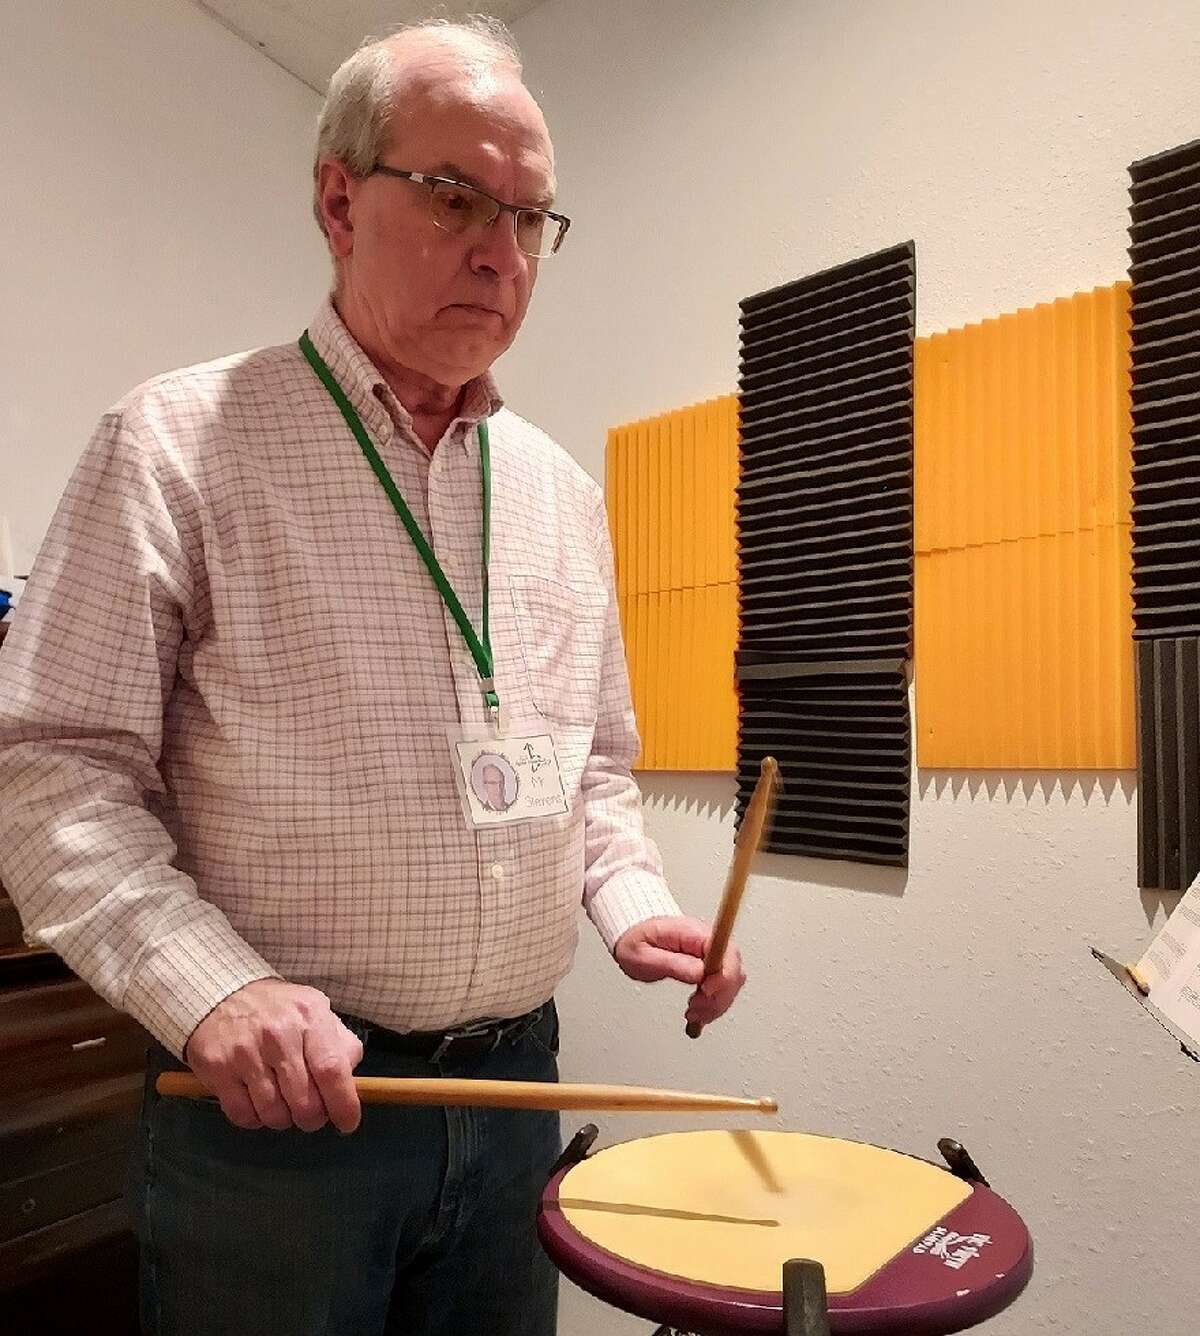 Longtime music teacher Roger Stevens of Midland keeps an eye on a young drummer from Auburn (not pictured) as they practice for a duet during a recent music lesson at UpBeat Music Academy.